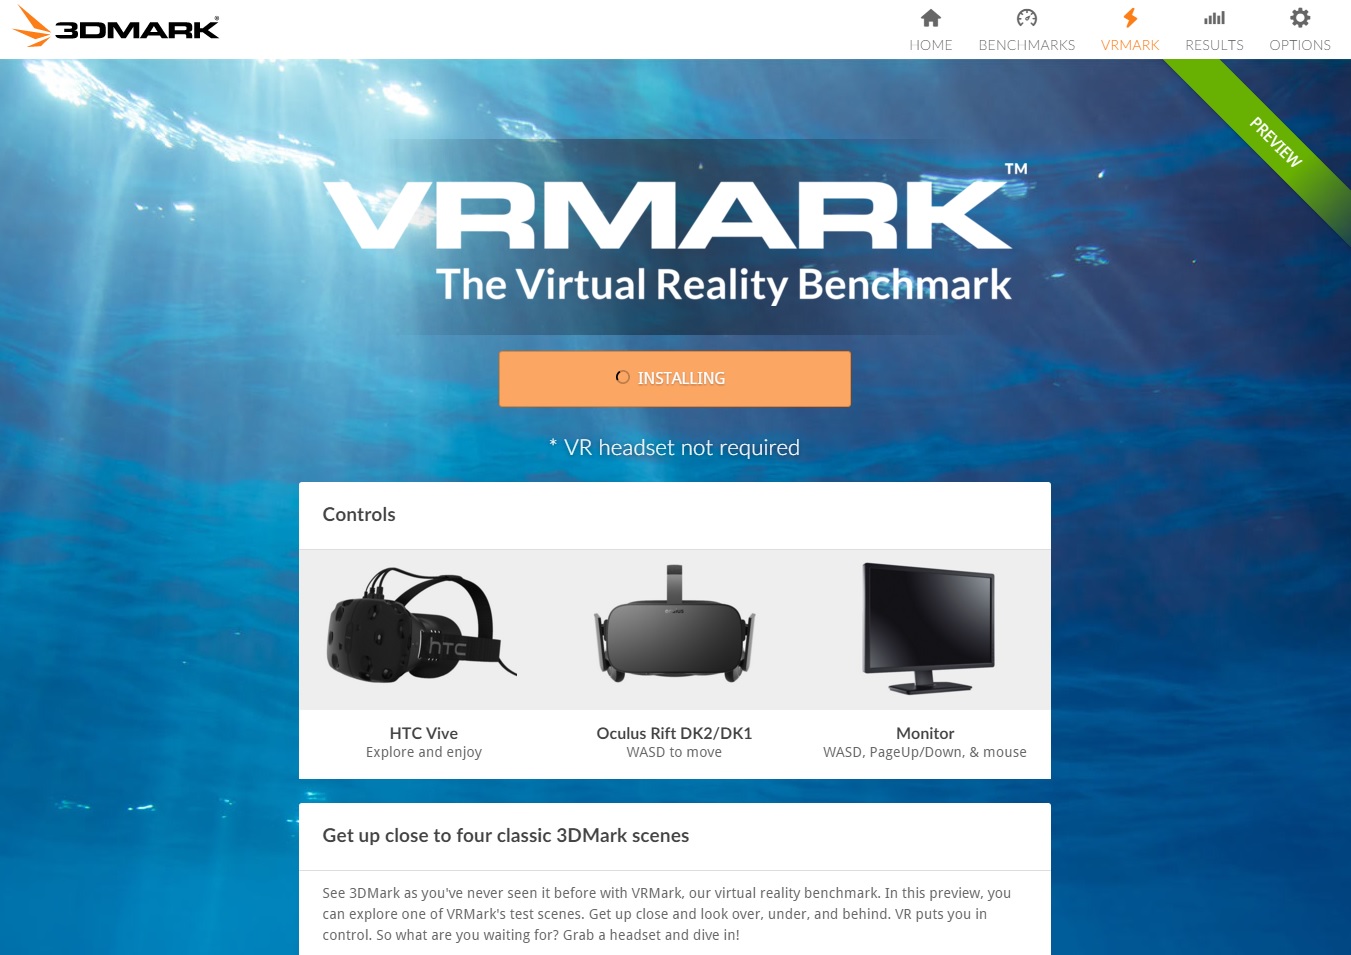 3DMARK Holiday Beta - New UI and VRMARK Preview